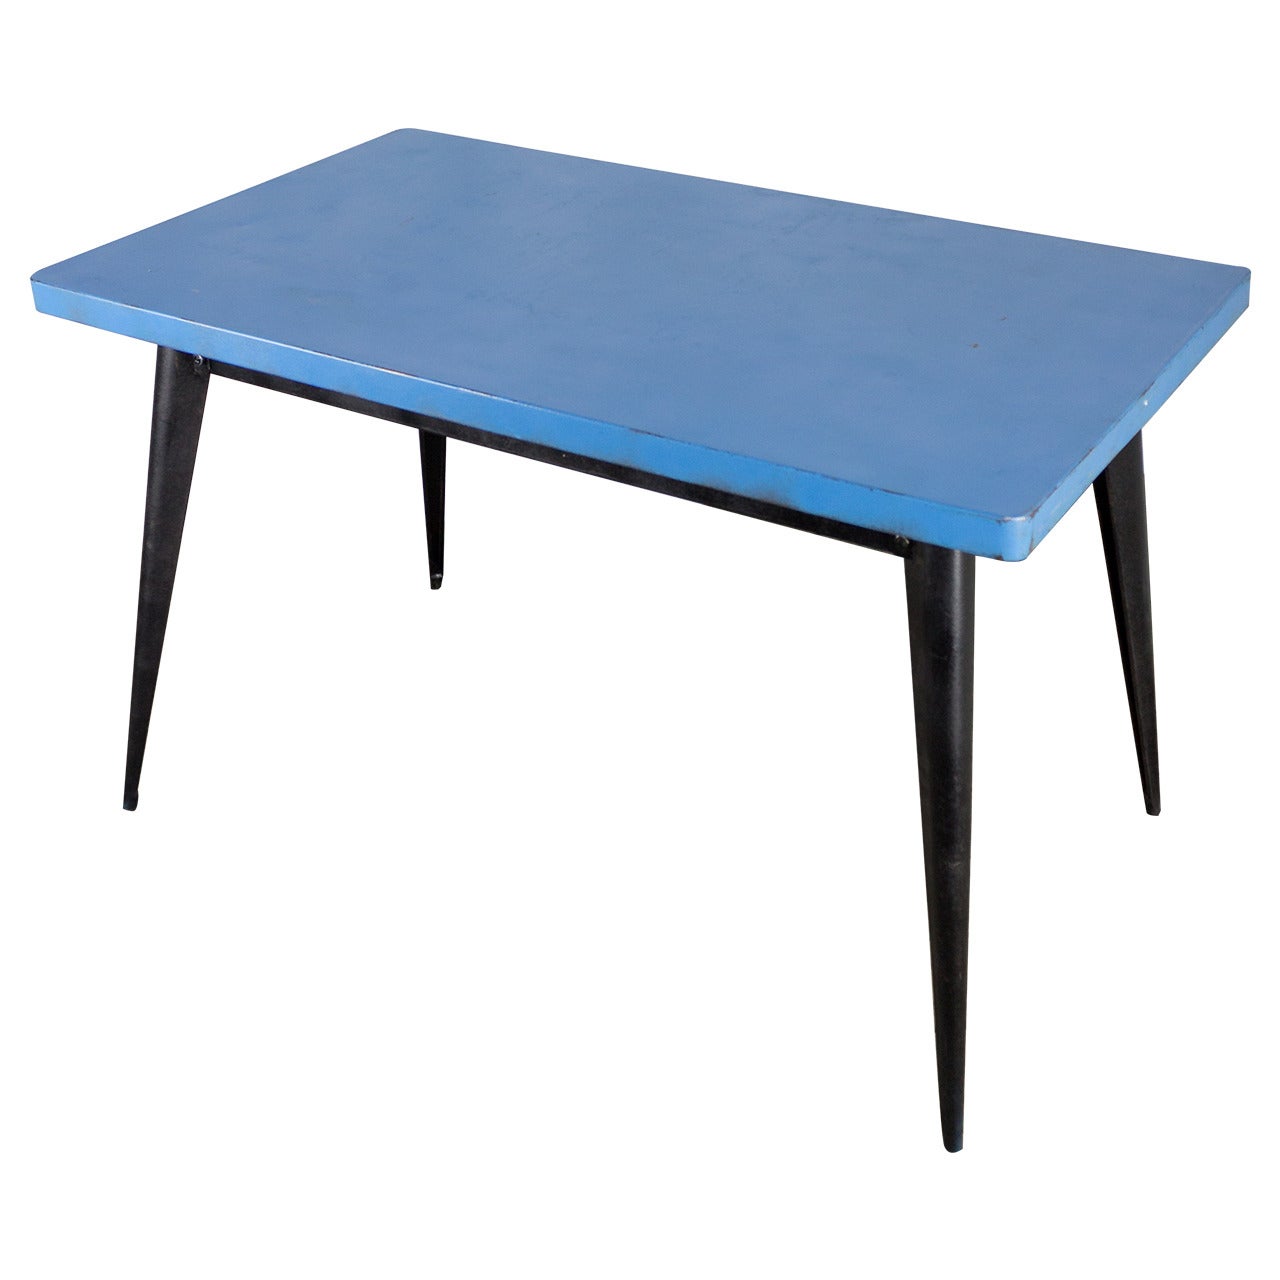 Tolix Table with Blue Top and Black Frame